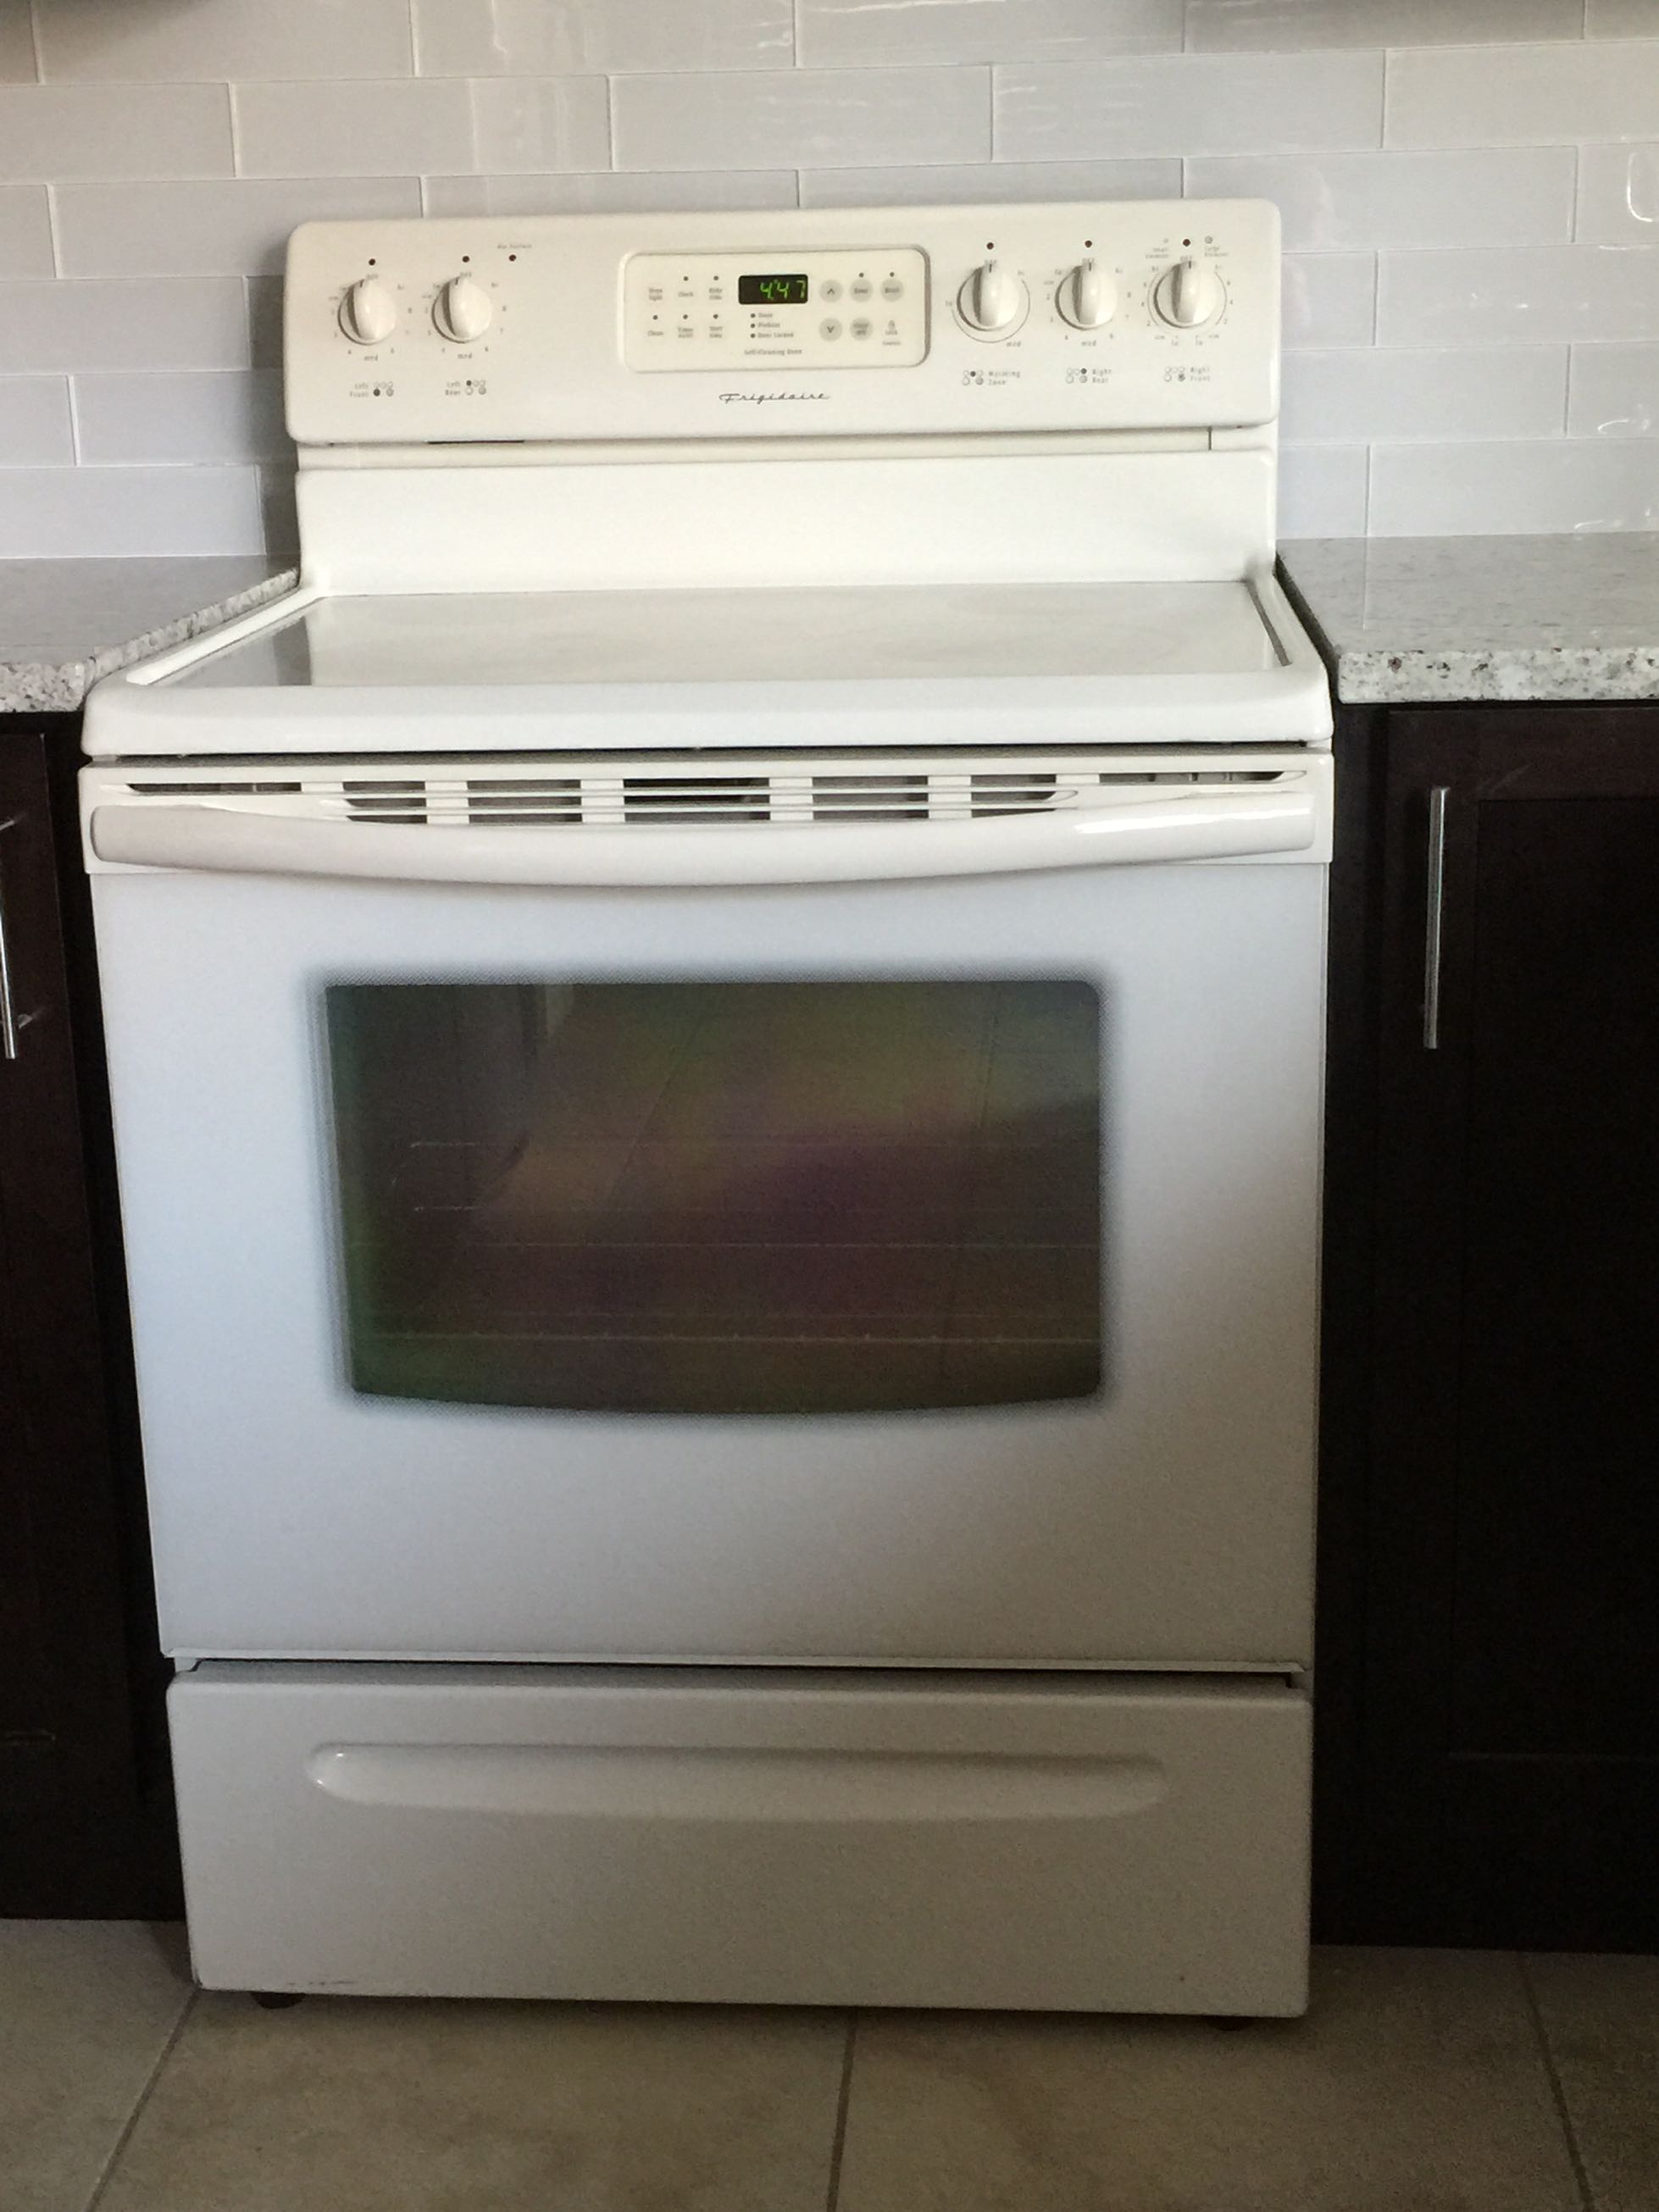 frigidaire-glass-top-range-self-cleaning-oven-used-my-xxx-hot-girl